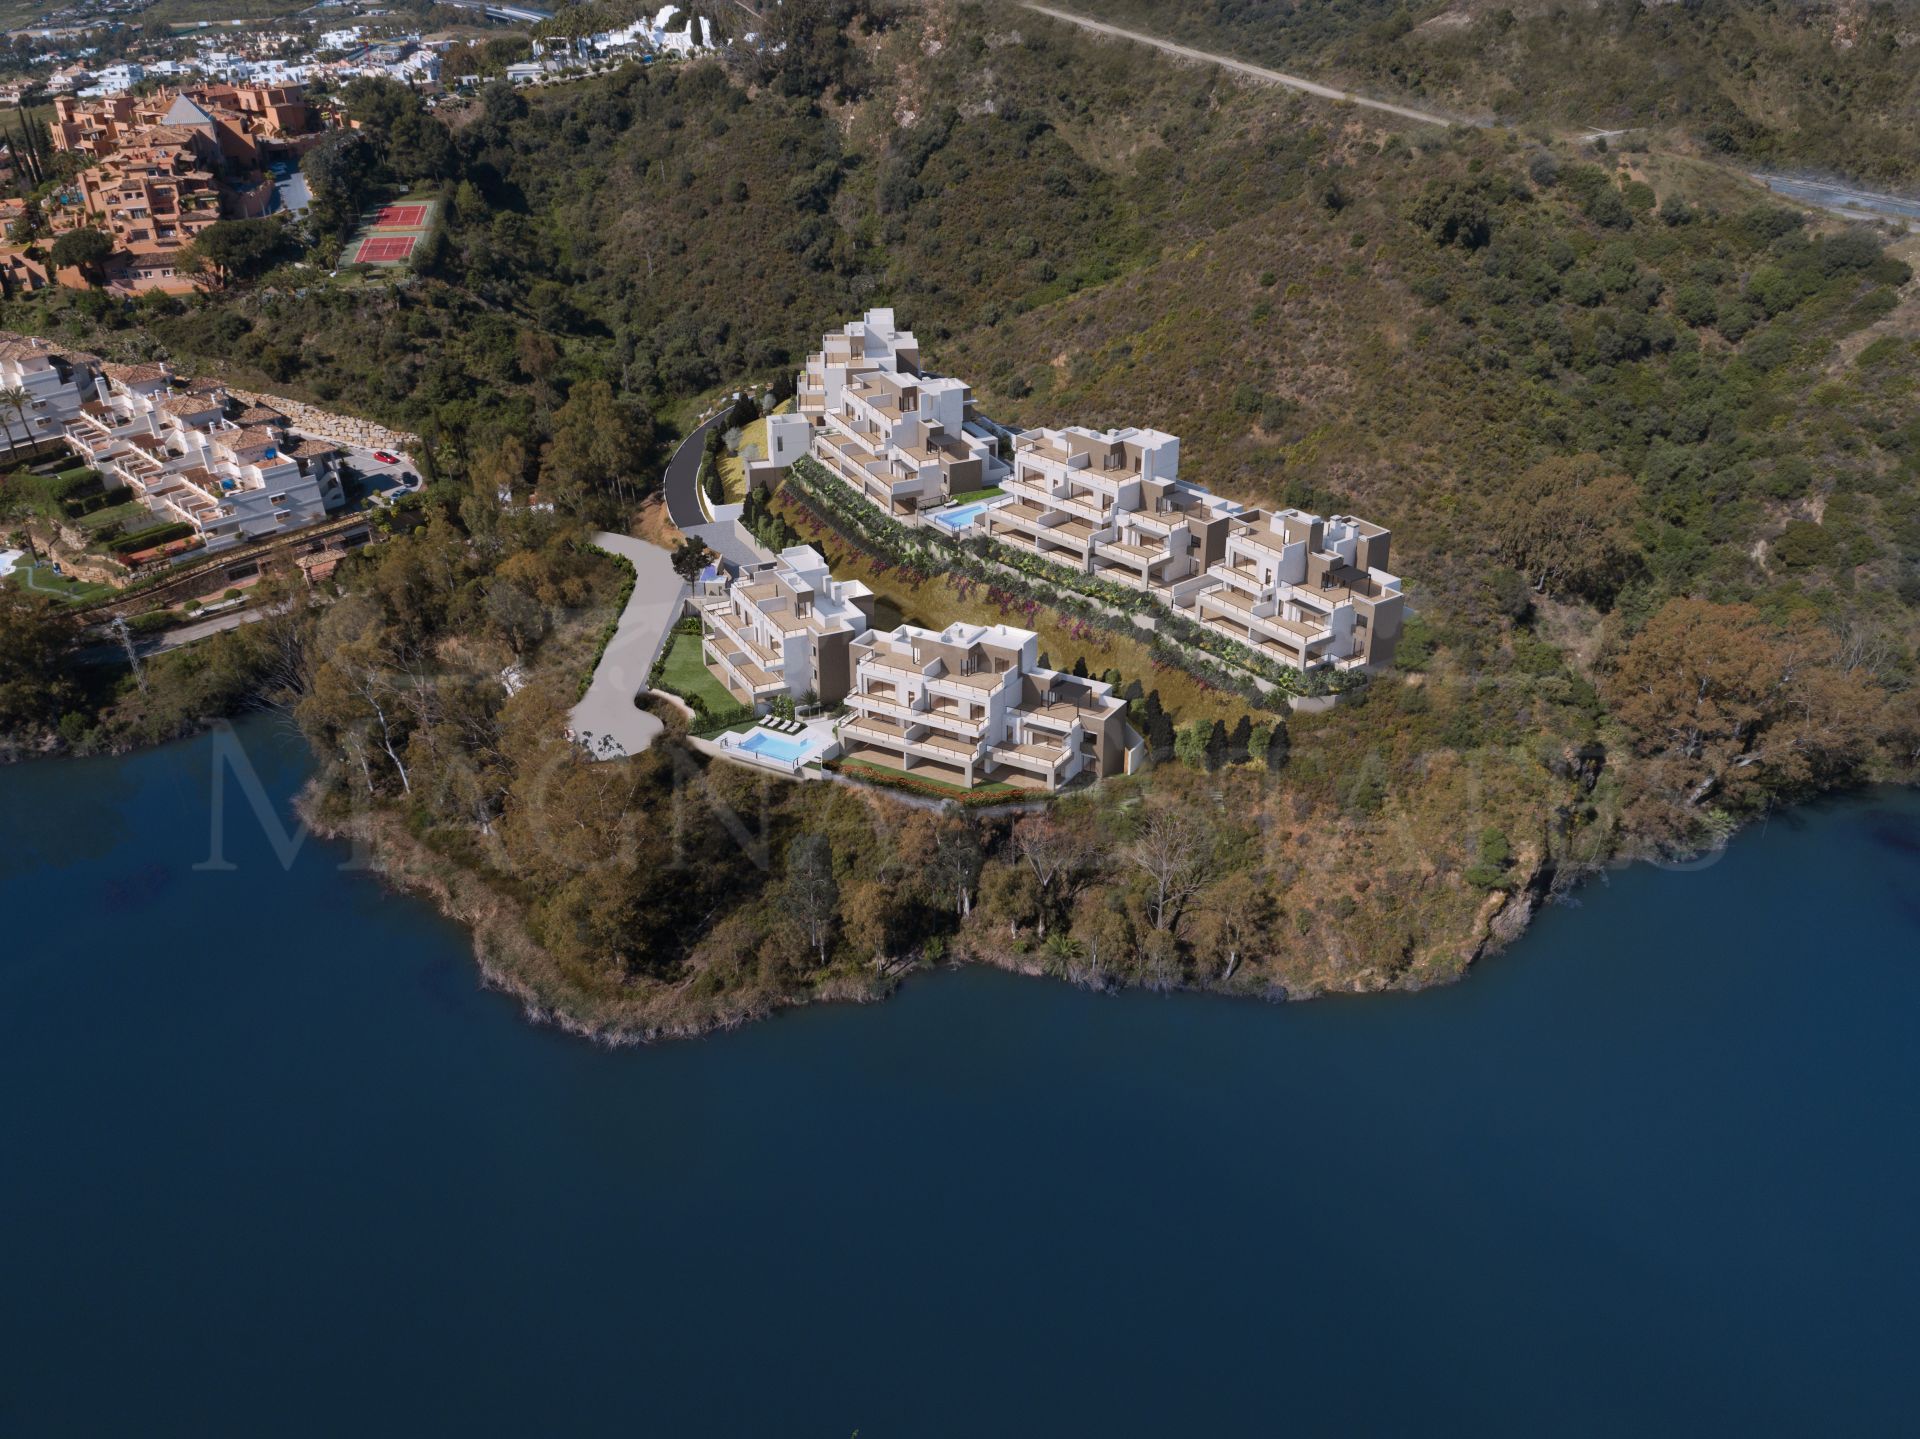 Beautiful 3-bedroom apartment on the edge of the lake in Nueva Andalucía